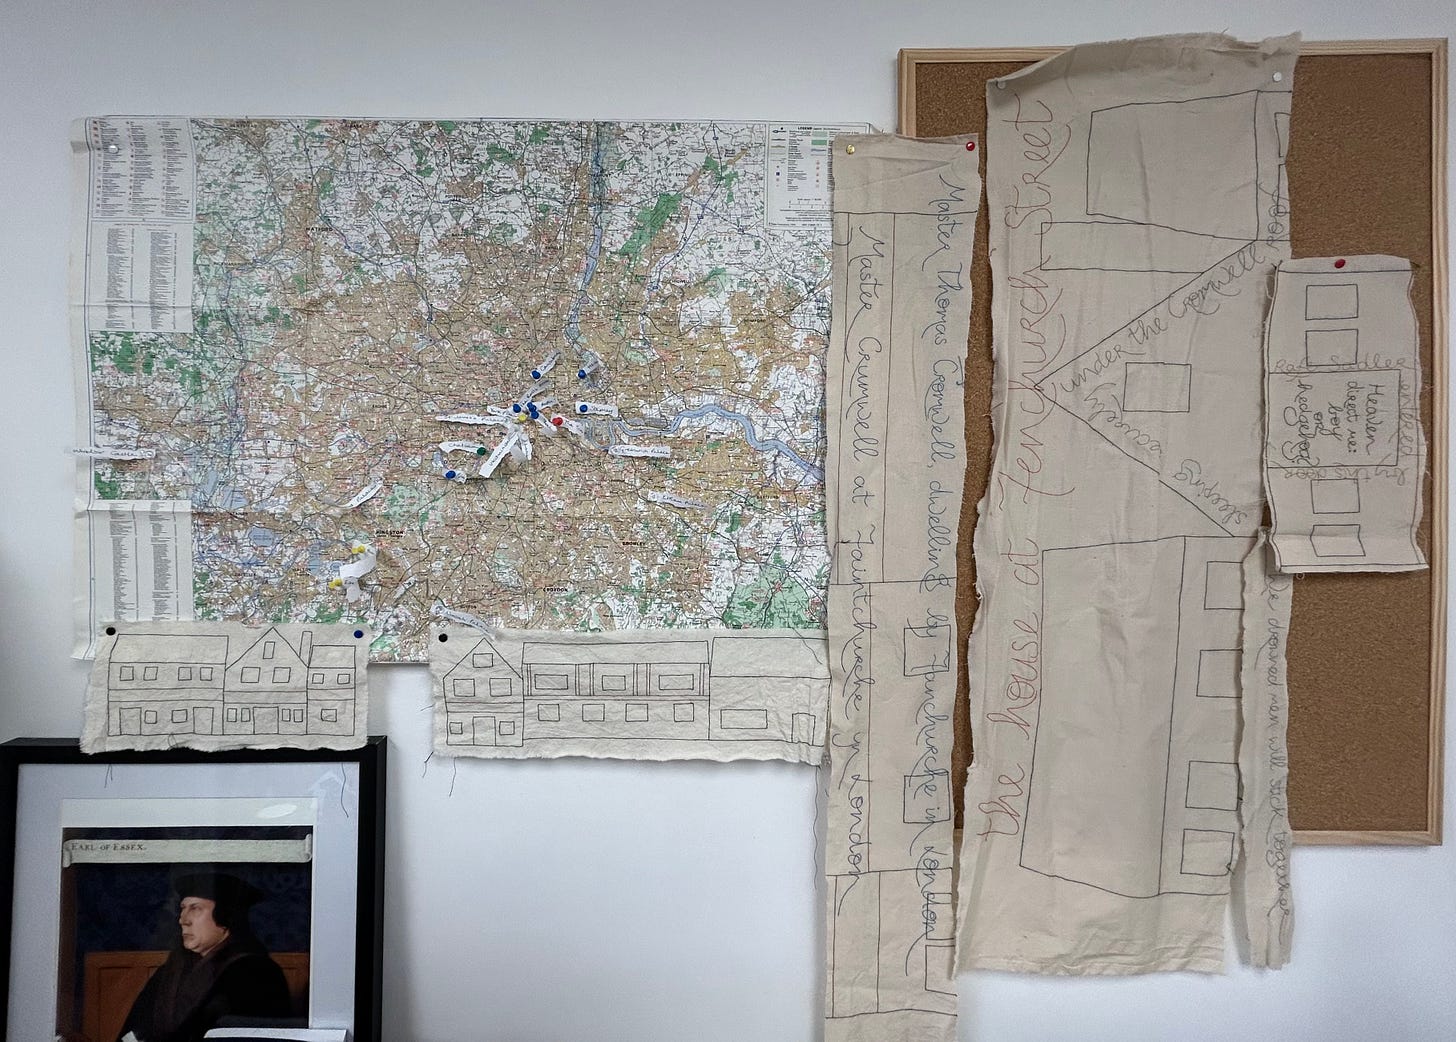 A map with pins showing locations around London; some embroidered images of houses; a portrait of Thomas Cromwell.